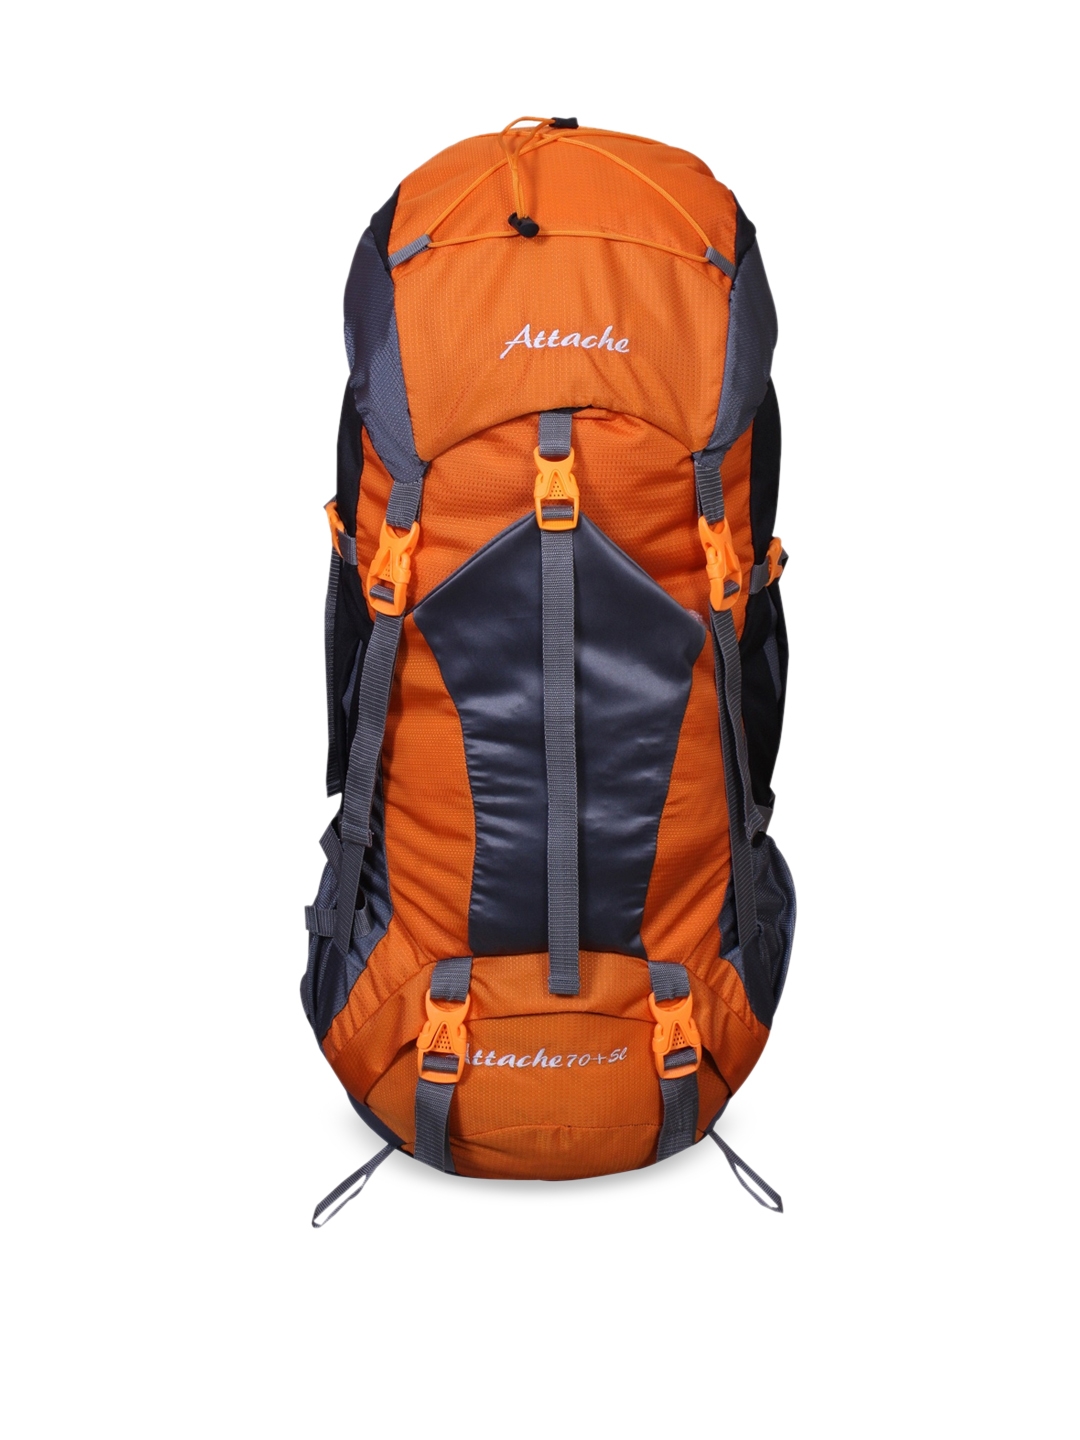 ATTACHE Unisex Orange   Grey Colourblocked Hiking Backpack with Rain Cover Rucksack 75L